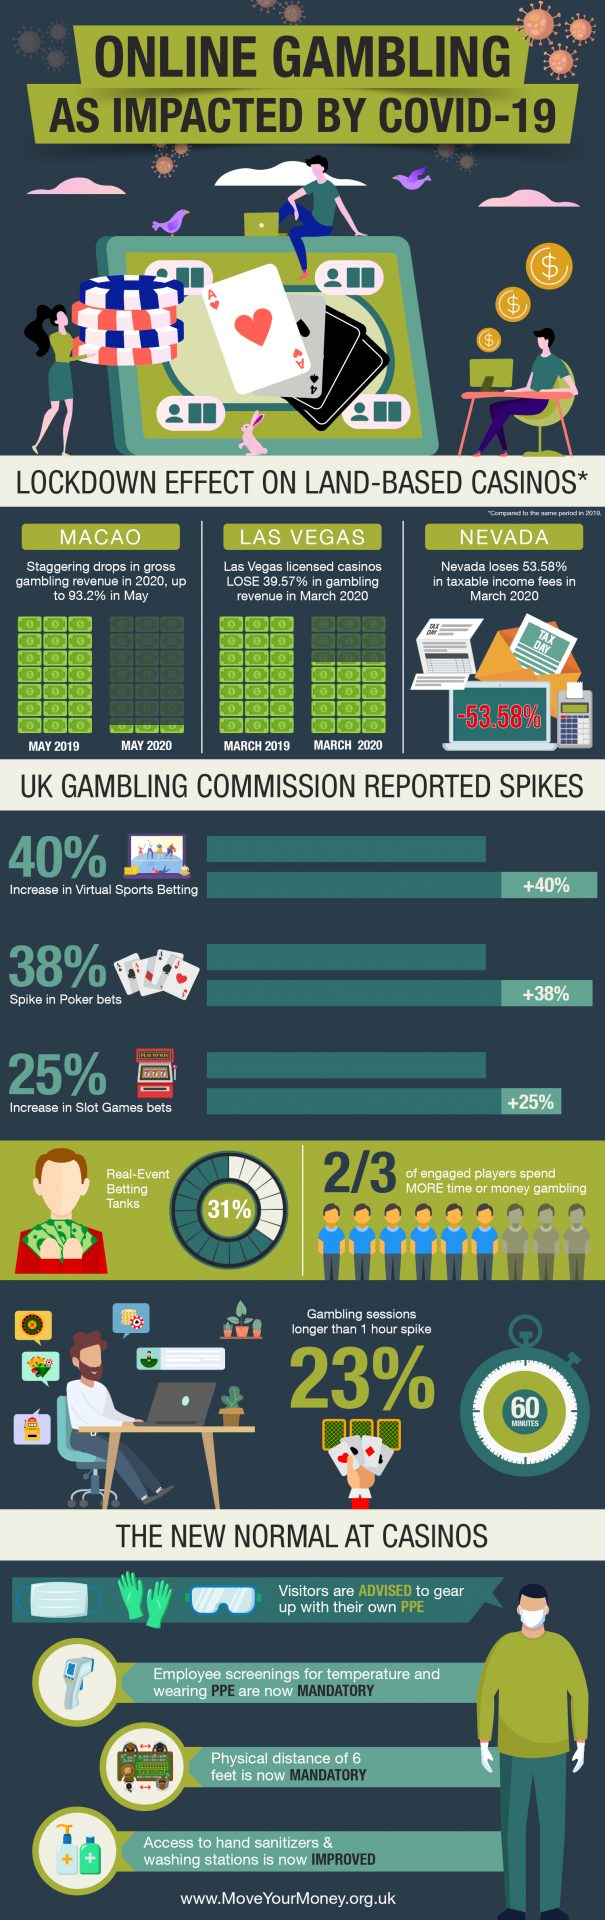 New Study Shows Responsible Gamblers Have Excellent Habits